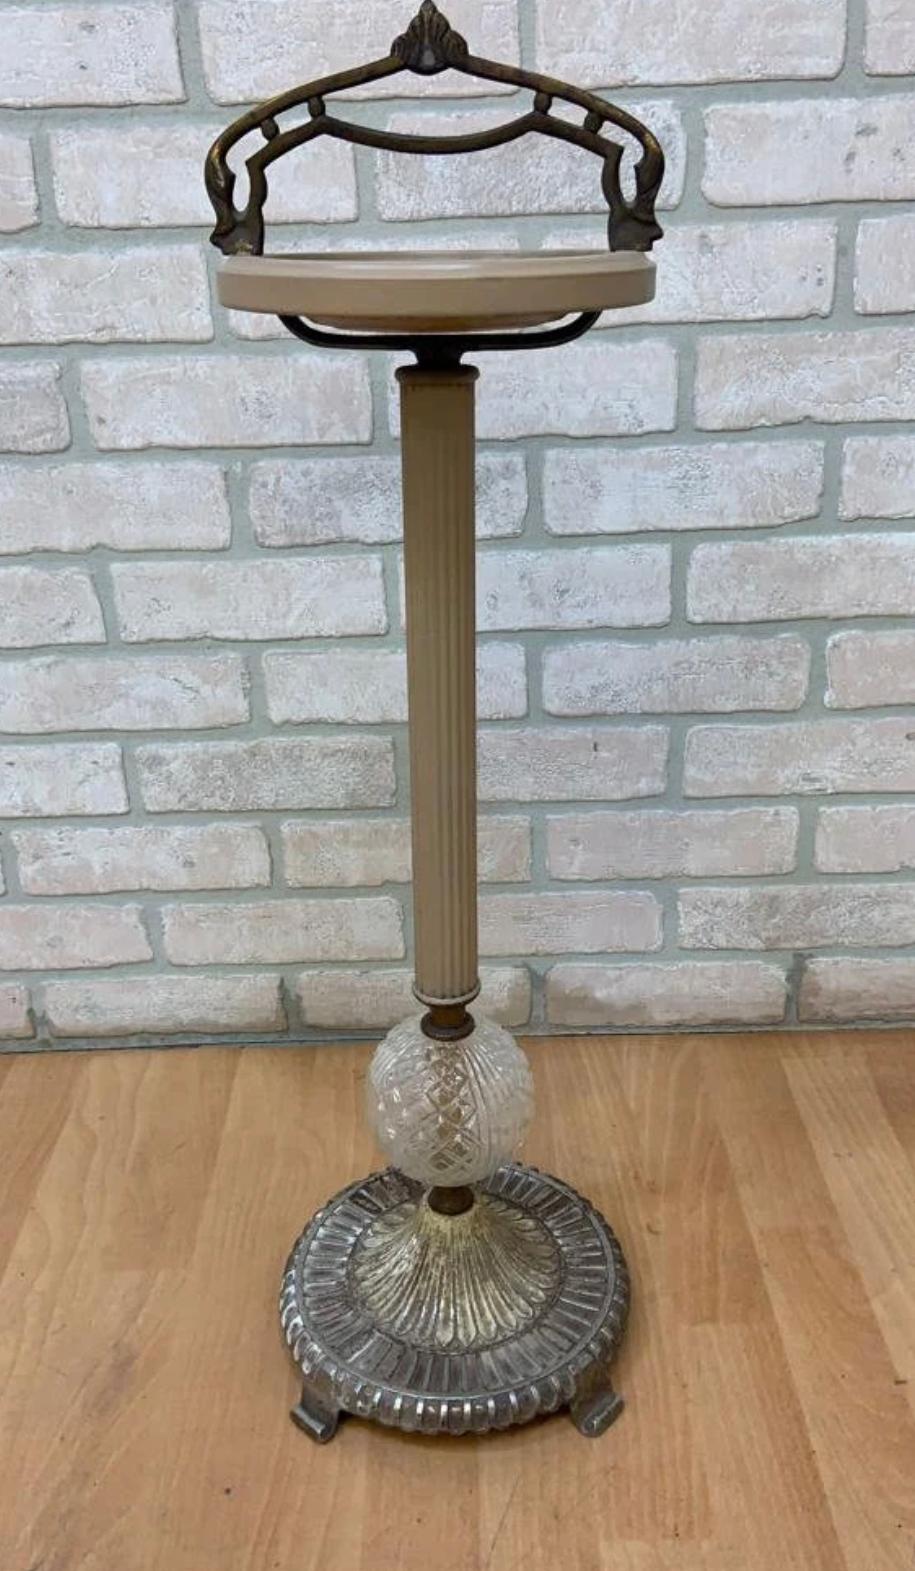 Art Deco Cast Iron and Crystal Cigar Ashtray Floor Stand with Forged Iron Handle

Truly a beautiful ashtray will be a gorgeous addition to the art
deco, Hollywood Regency decor.

Circa 1940

Dimensions:
H 28.5